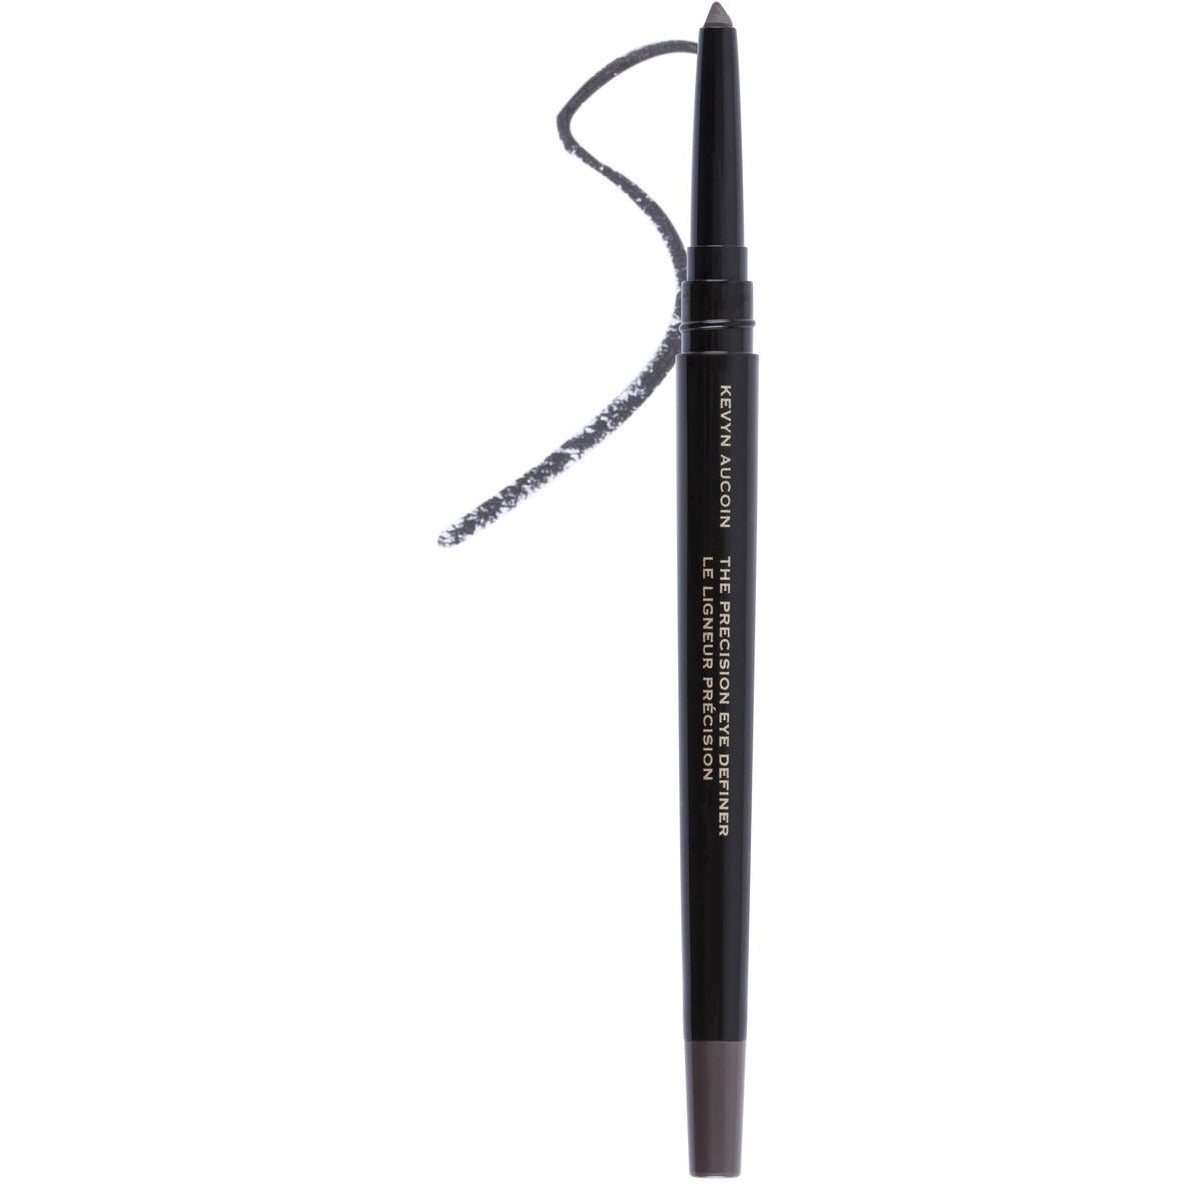 The Precision Eye Definer - Ironclad